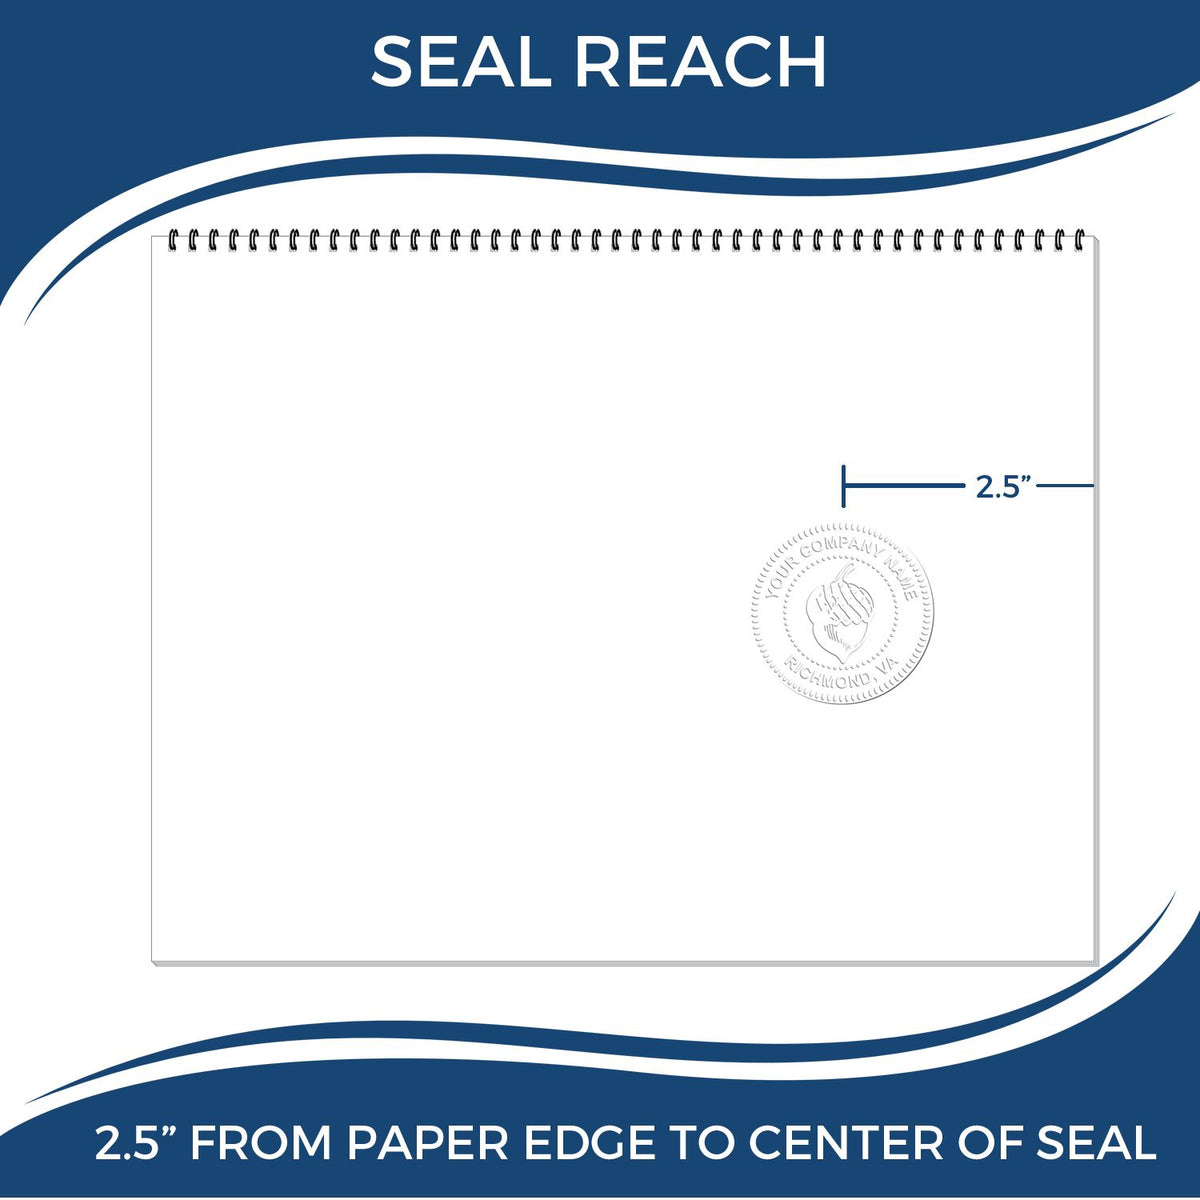 An infographic showing the seal reach which is represented by a ruler and a miniature seal image of the Long Reach Texas Geology Seal